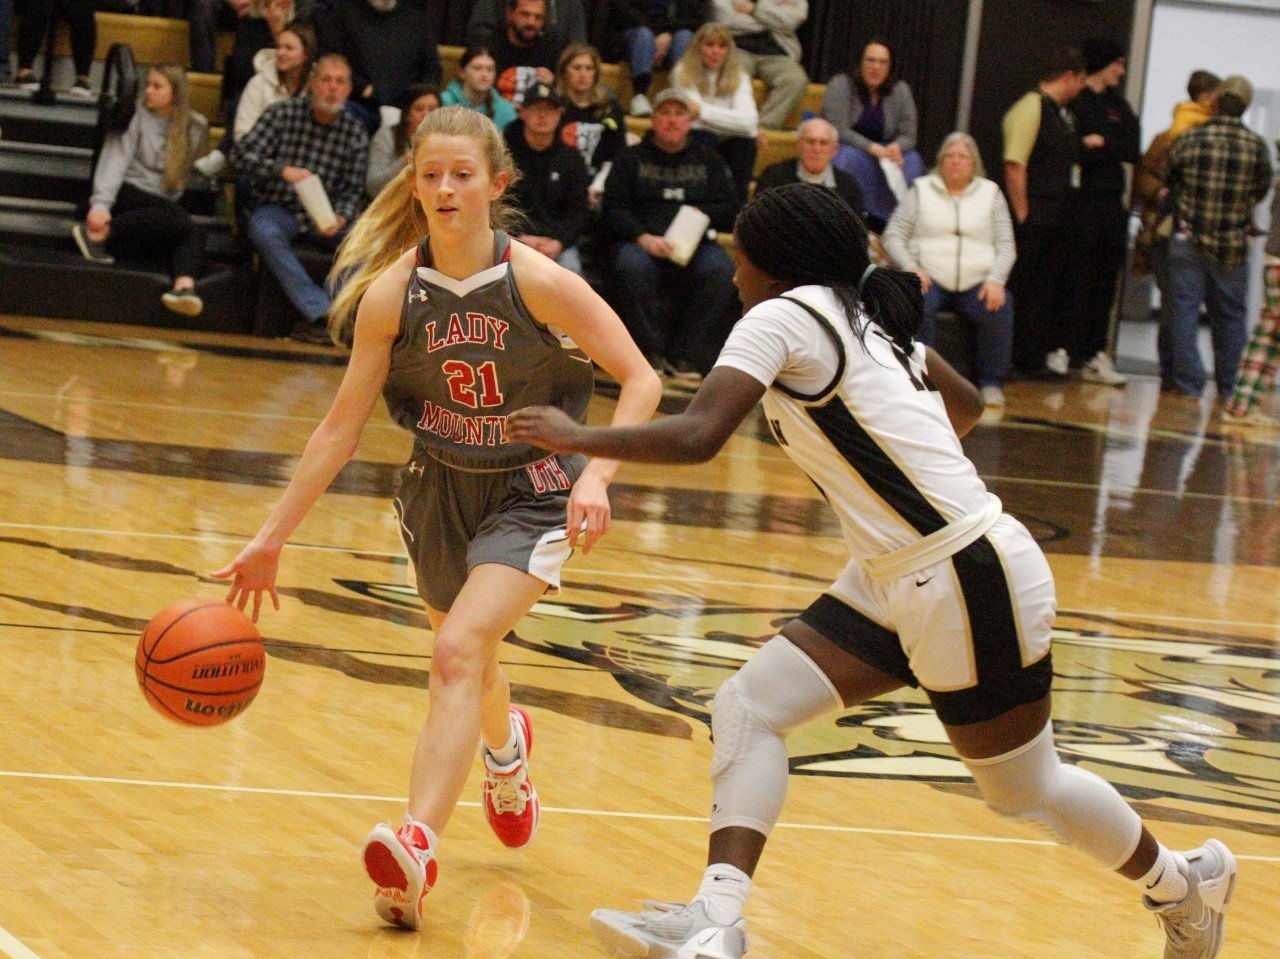 DeLorean Mason led the Lady Mounties with 12 points in their regular season finale against Lebanon.